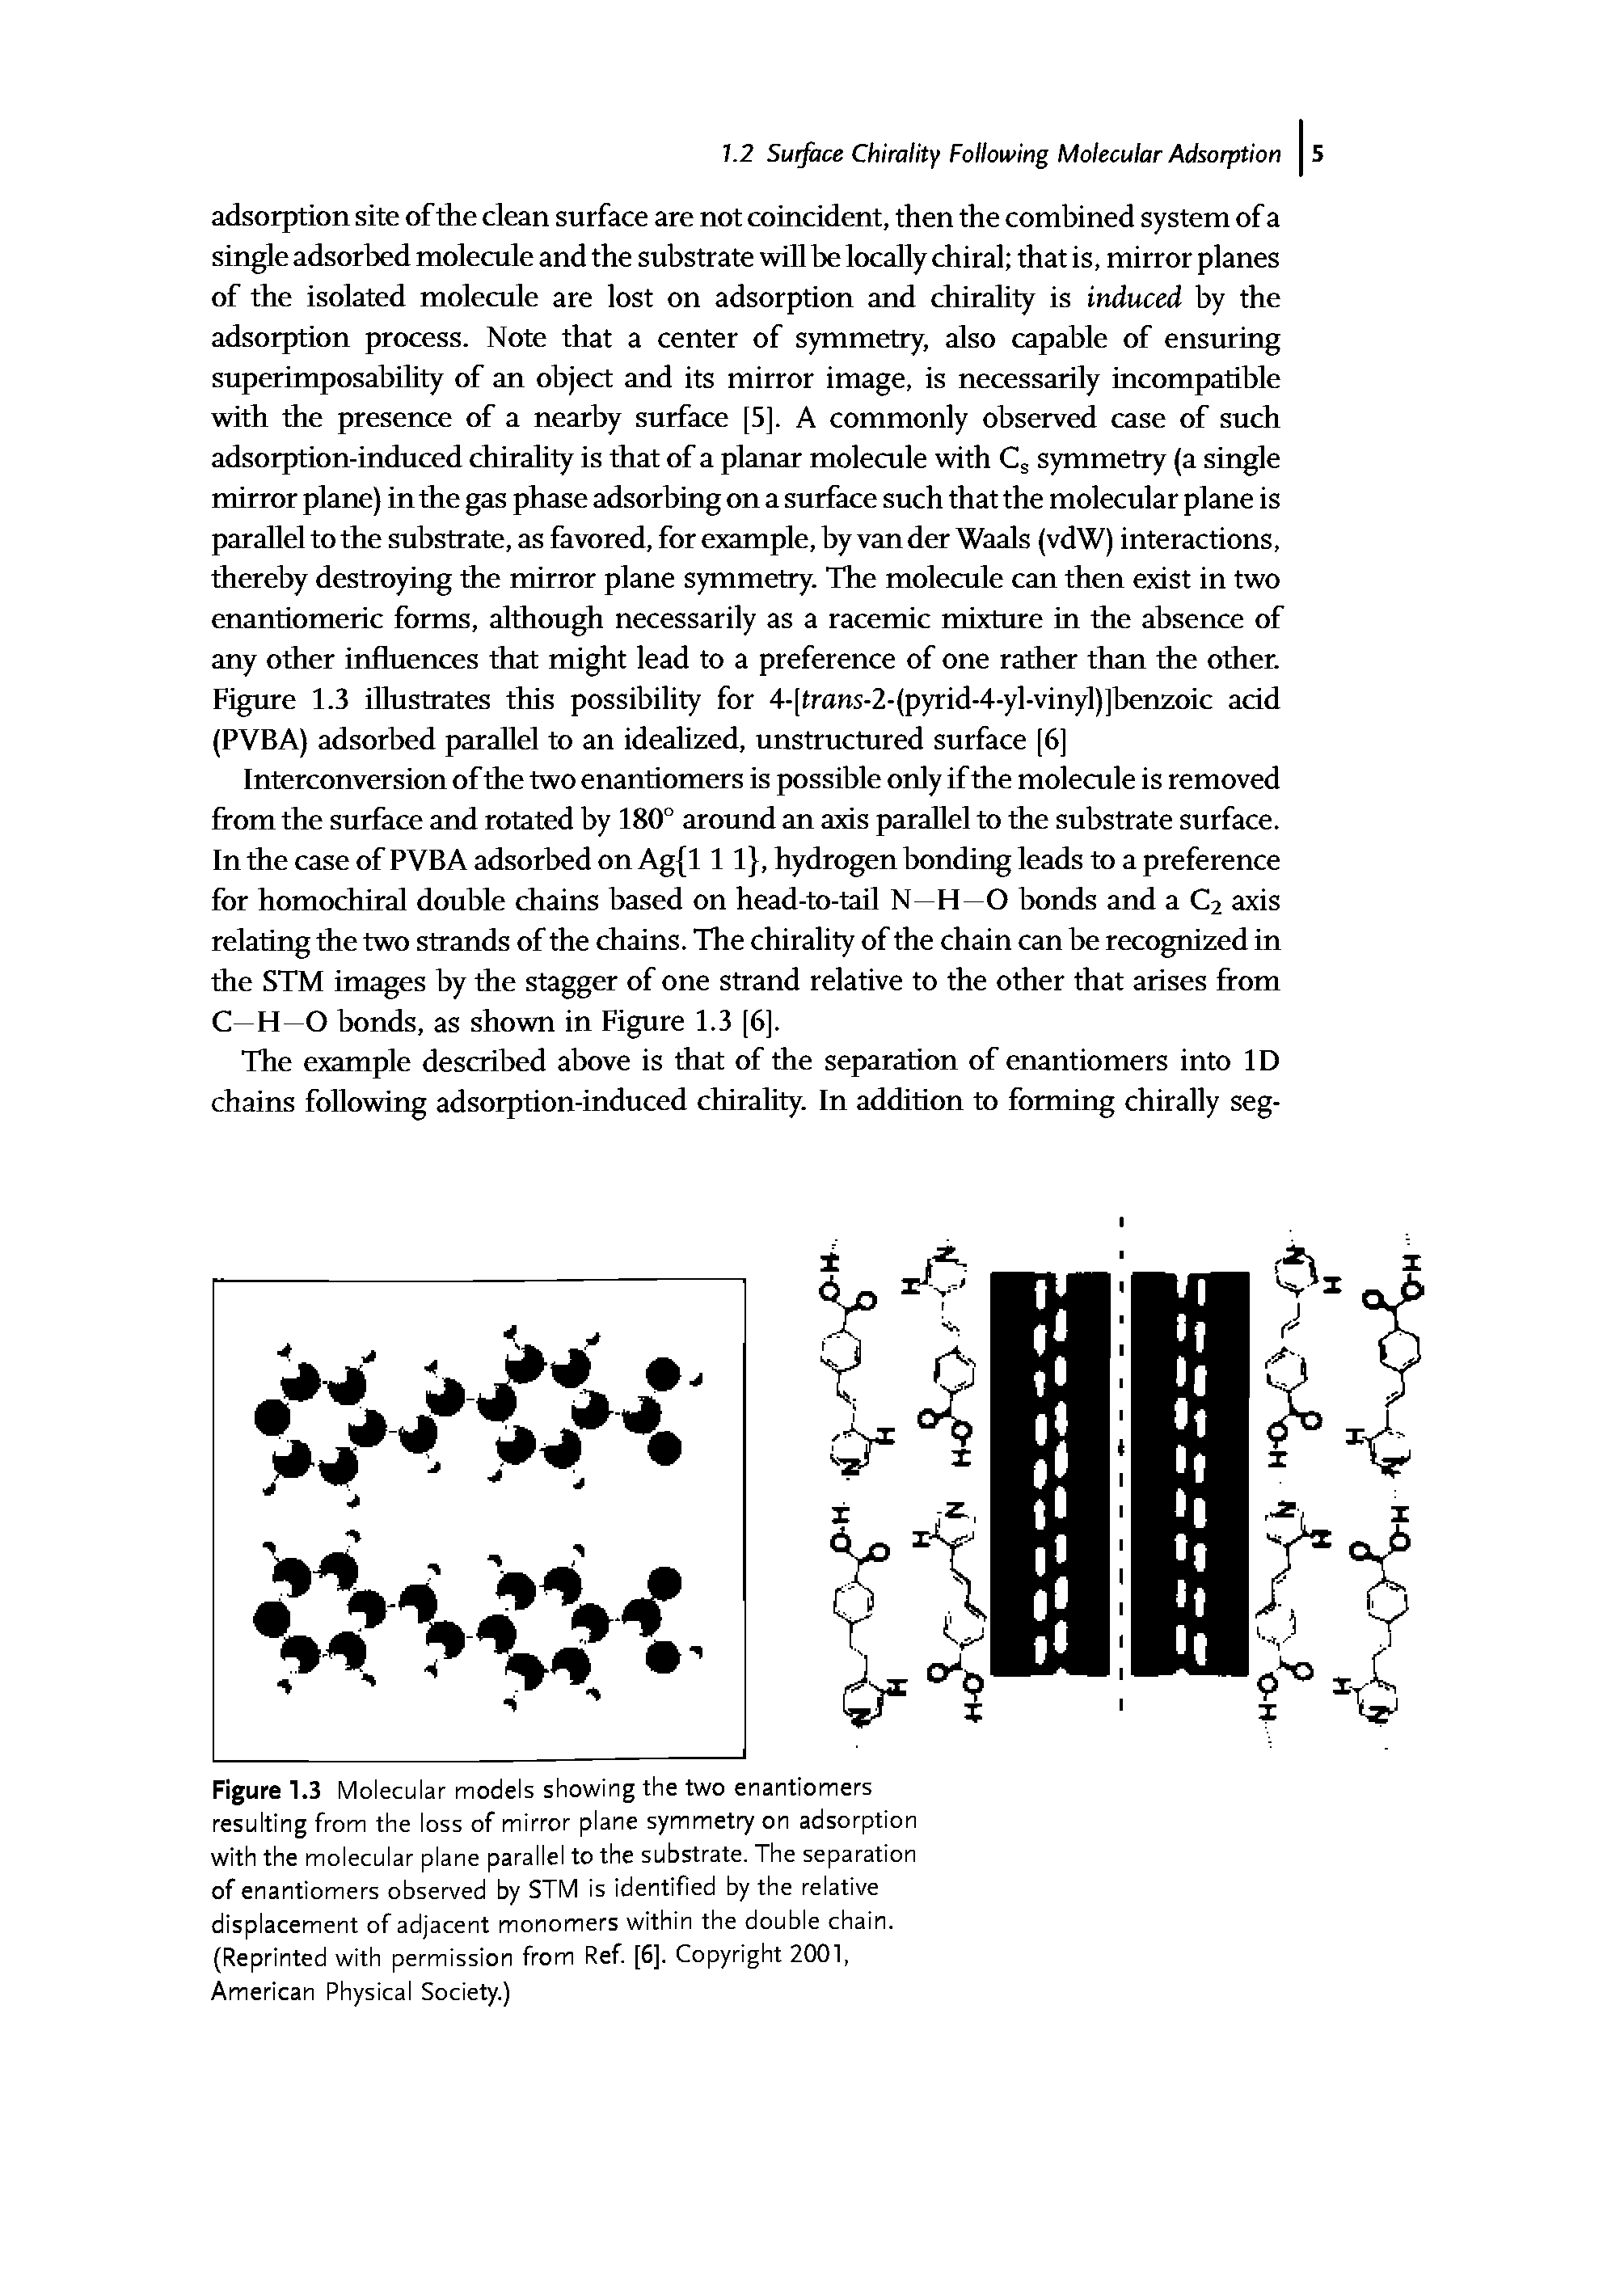 Figure 1.3 Molecular models showing the two enantiomers resulting from the loss of mirror plane symmet7 on adsorption with the molecular plane parallel to the substrate. The separation of enantiomers observed by STM is identified by the relative displacement of adjacent monomers within the double chain. (Reprinted with permission from Ref. [6]. Copyright 2001, American Physical Society.)...